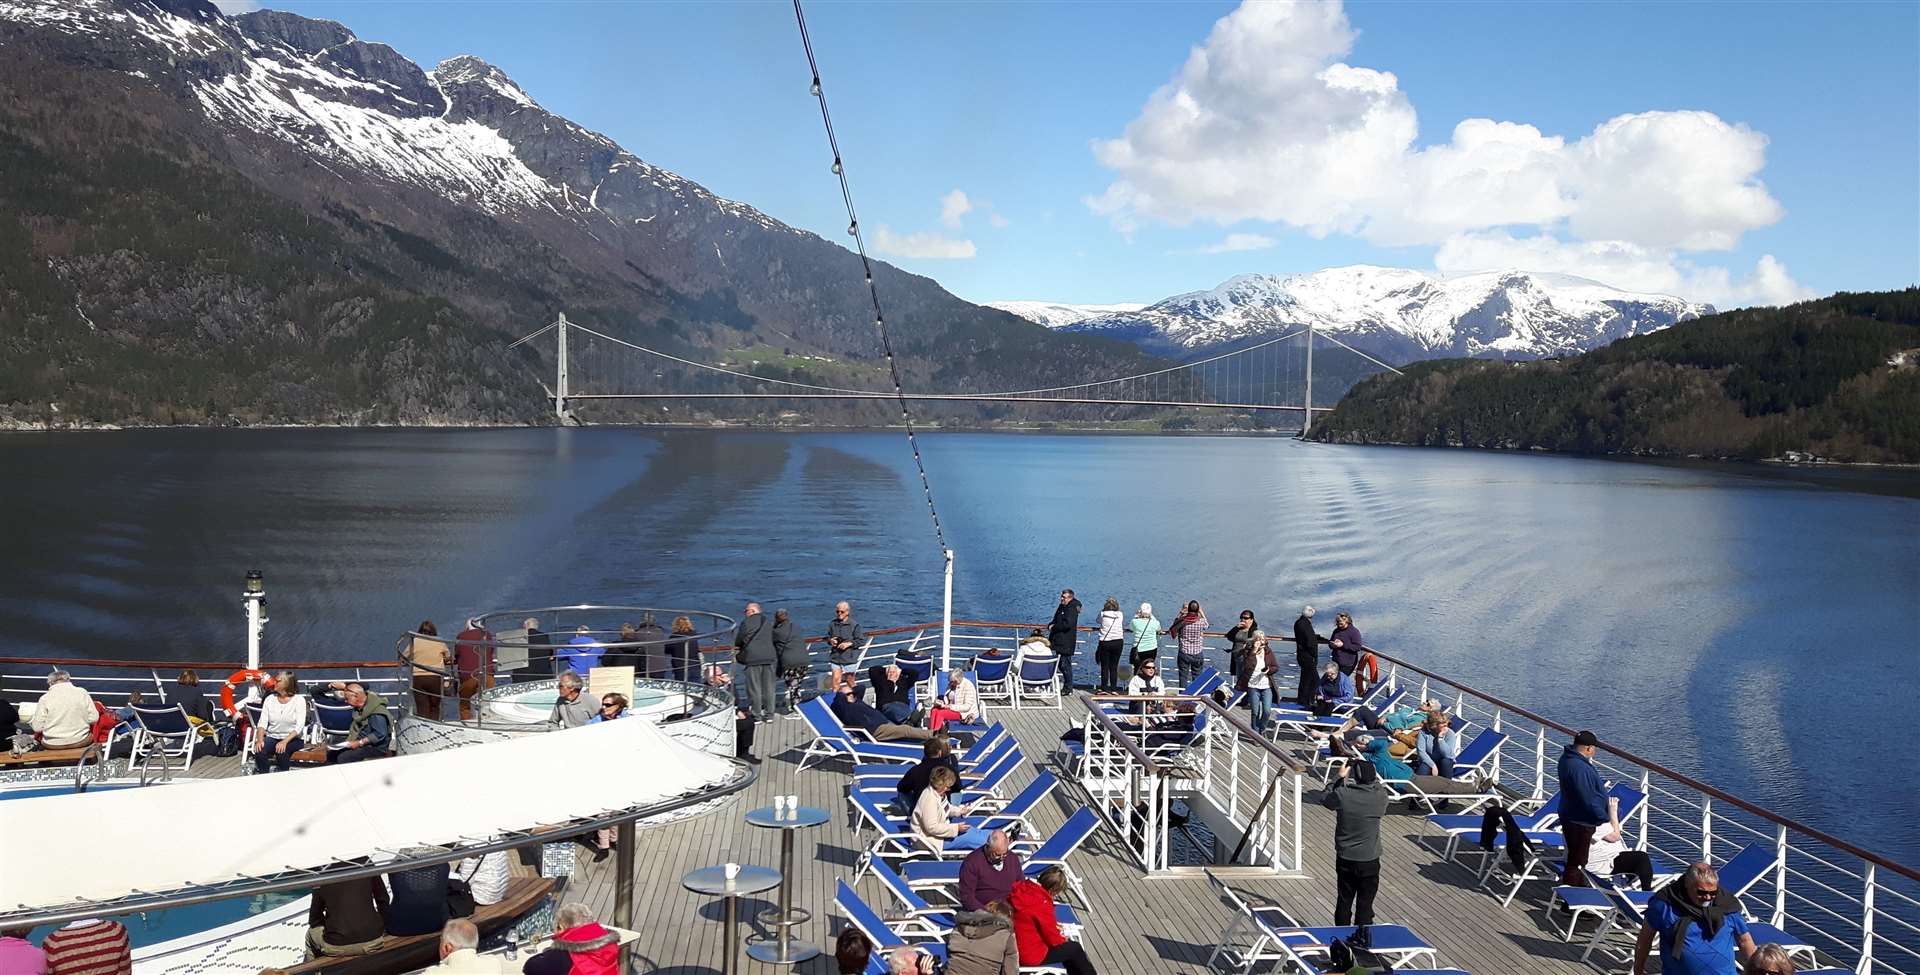 A stunning view as the ship sails through the Hardangerfjord